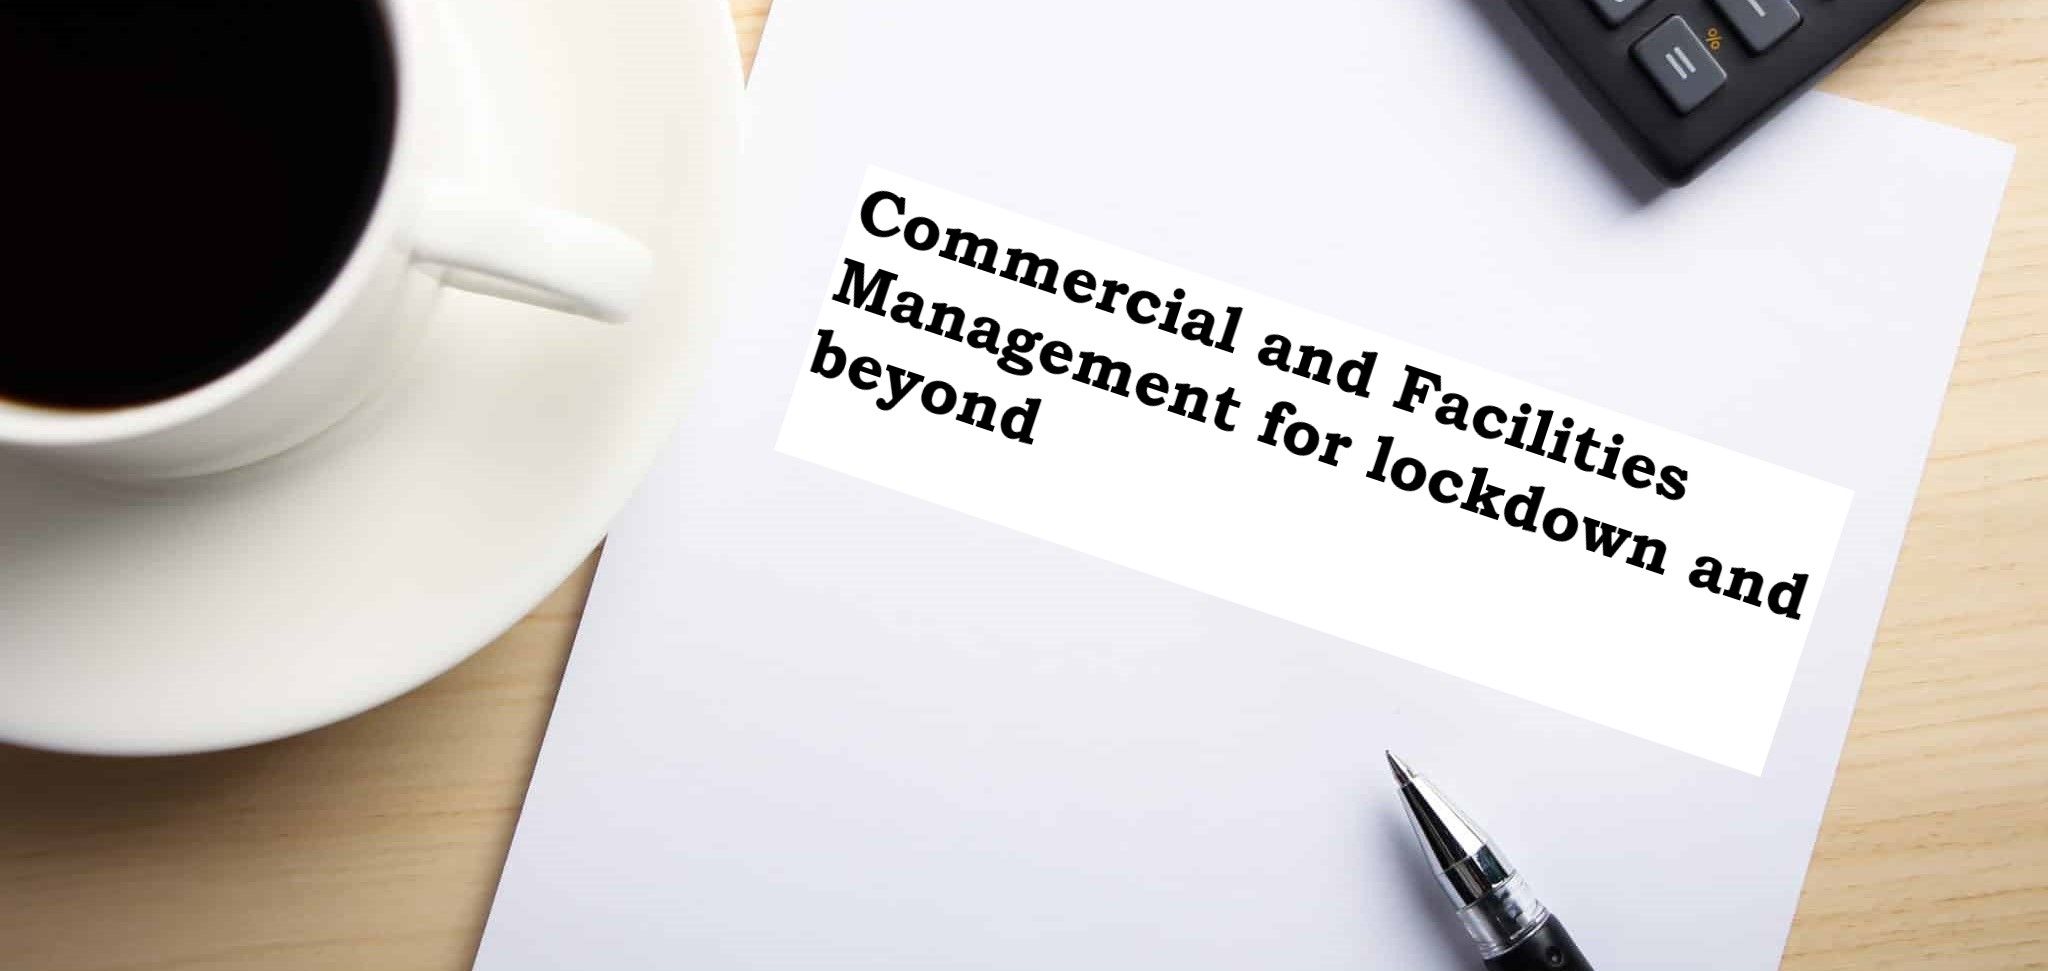 A sheaf of paper with the title "Commercial and Facilities Management for Lockdown and Beyond"